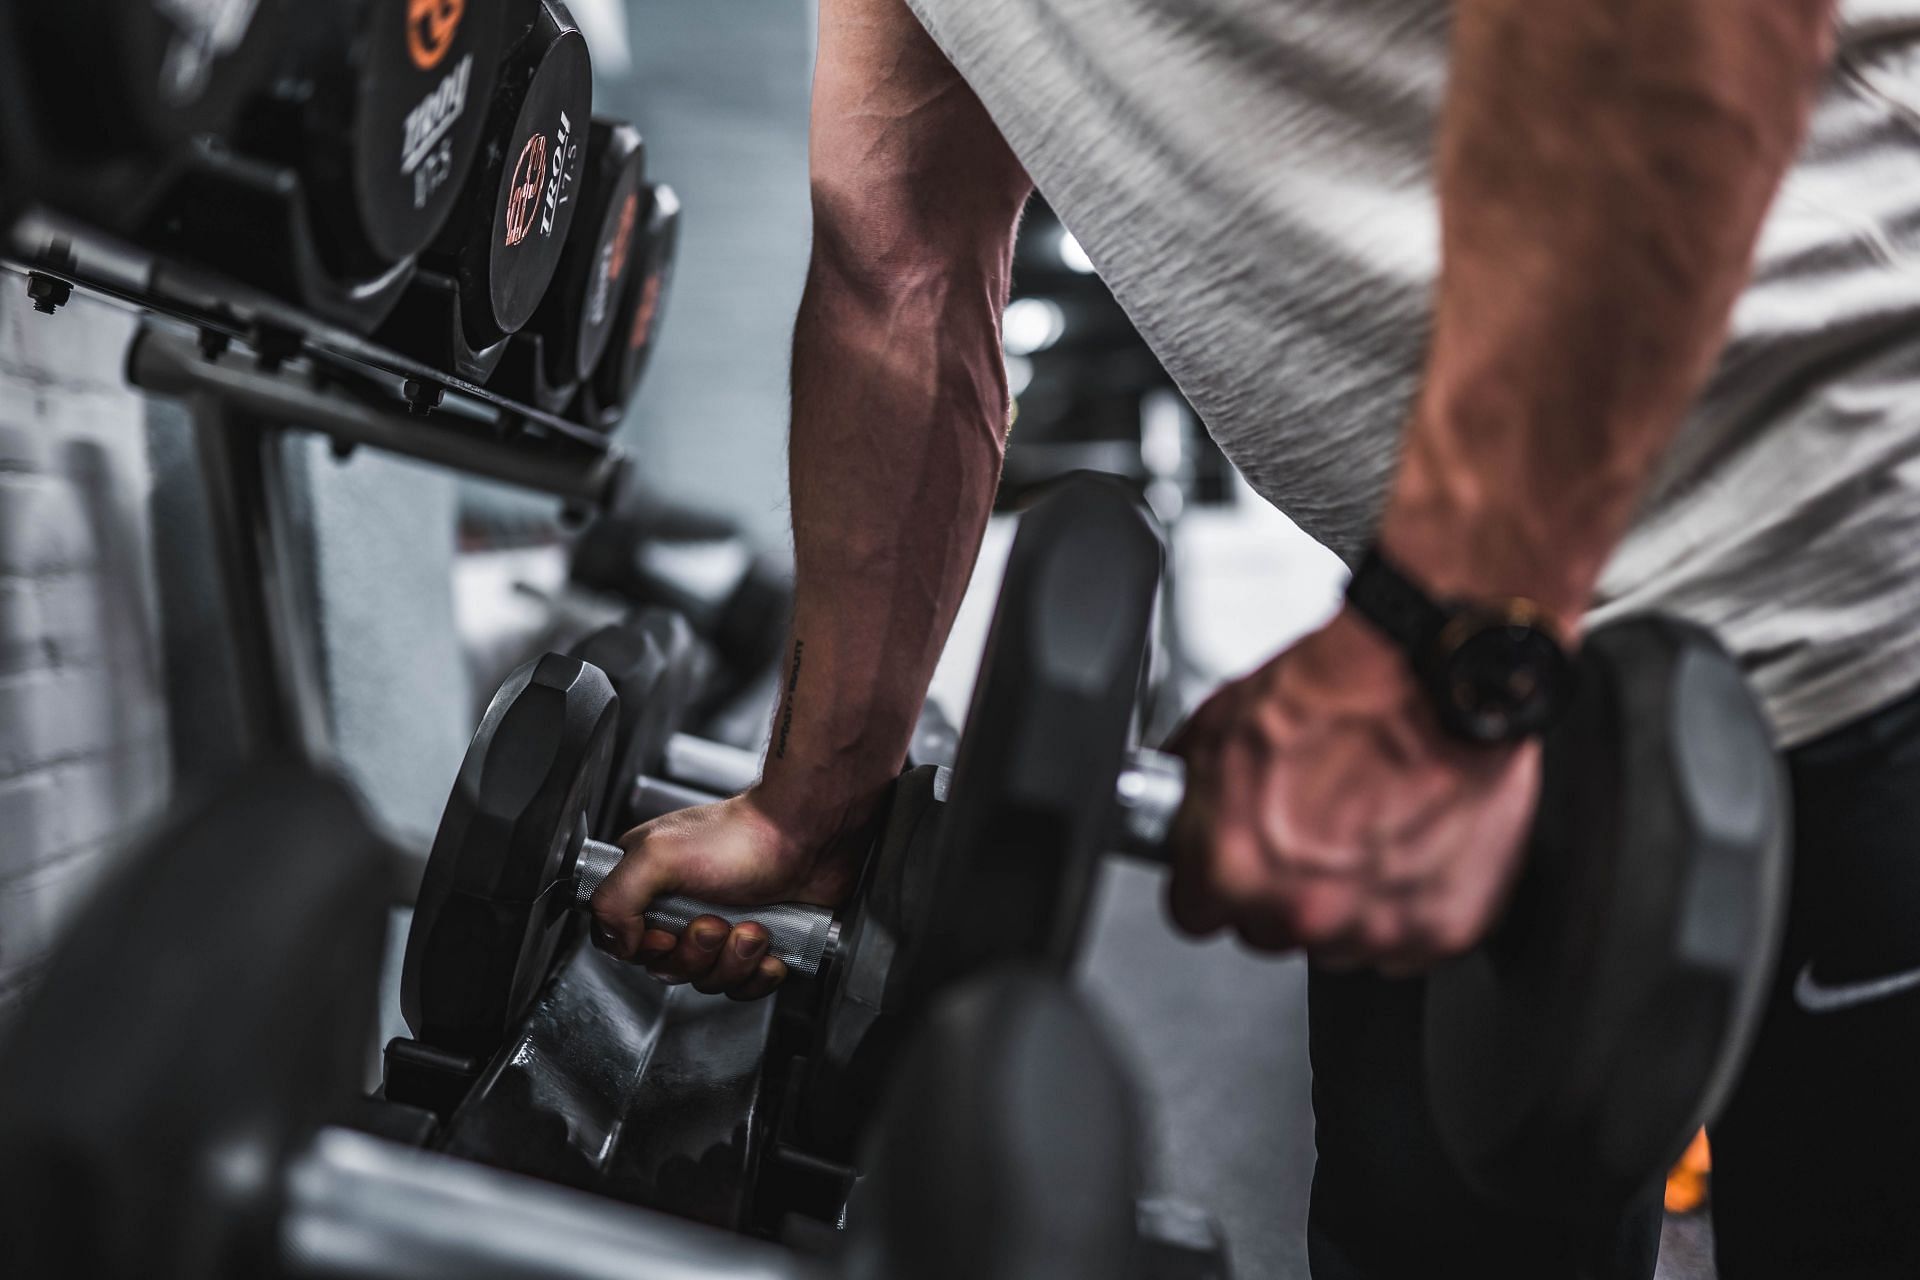 Imagining and Slow reps help in strengthening the mid-muscle connection (Photo by Anastase Maragos on Unsplash)